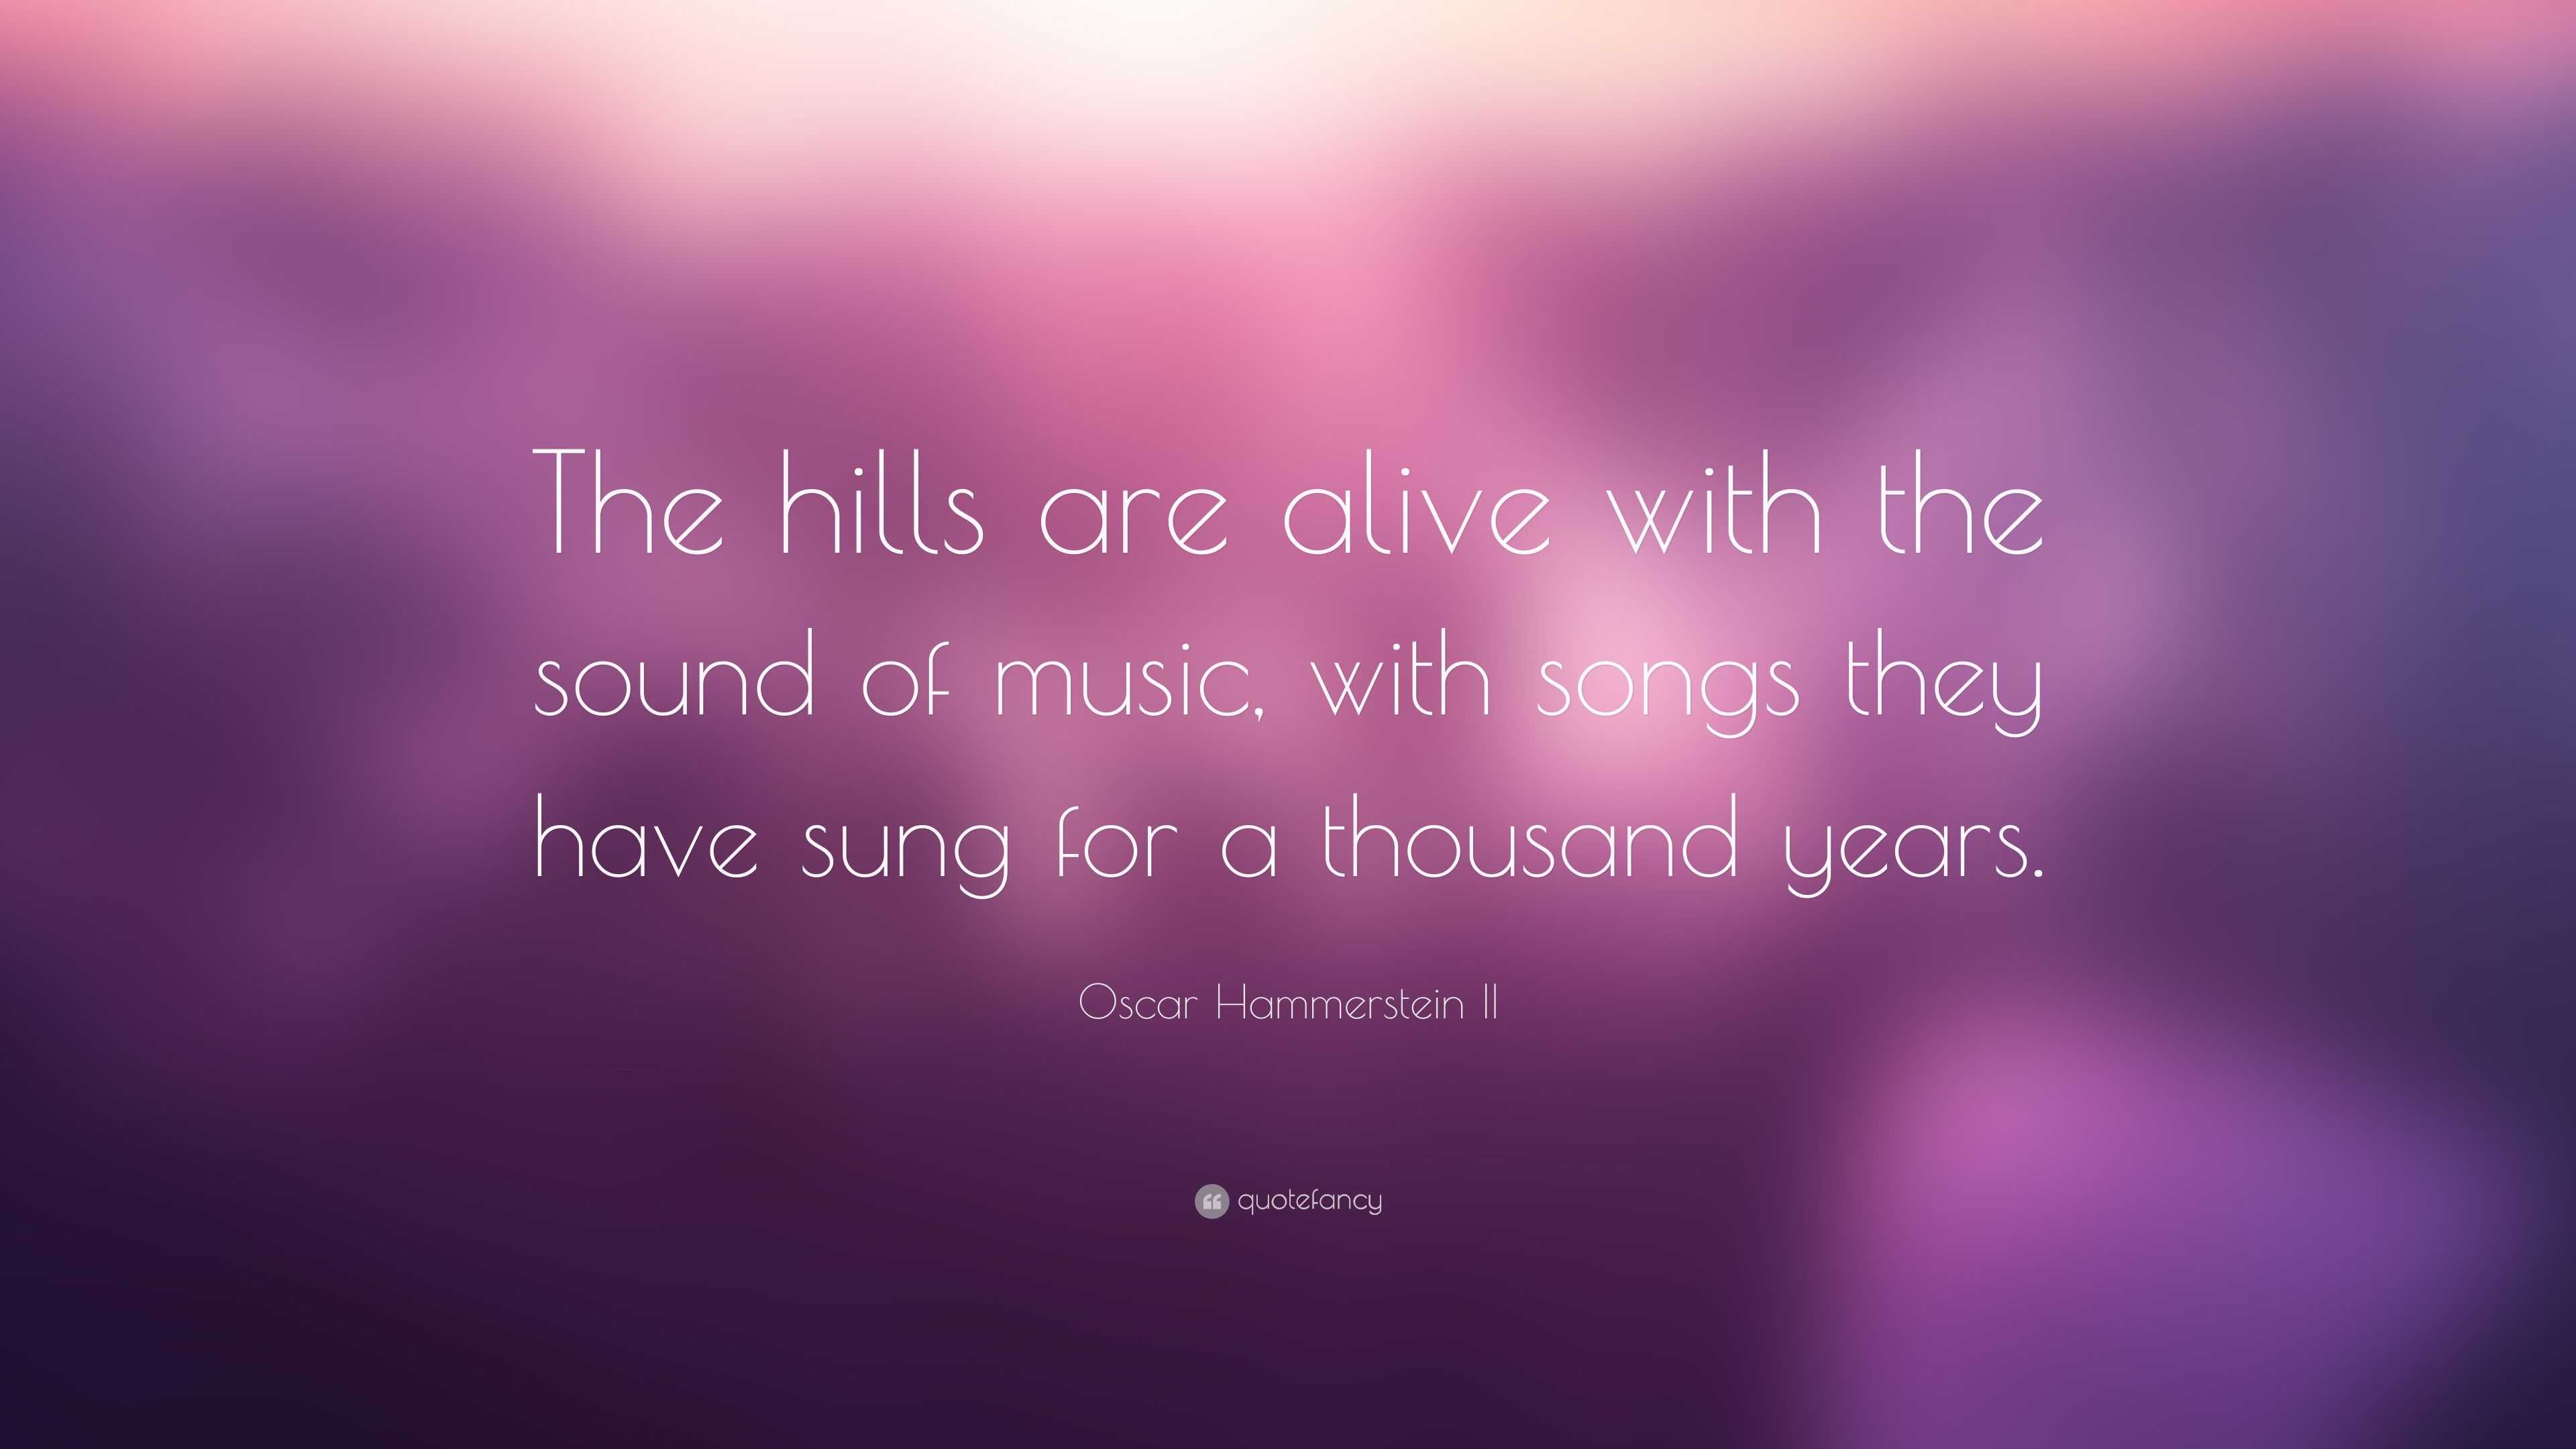 The hills are alive with growth mindset thinking - Sound of Music